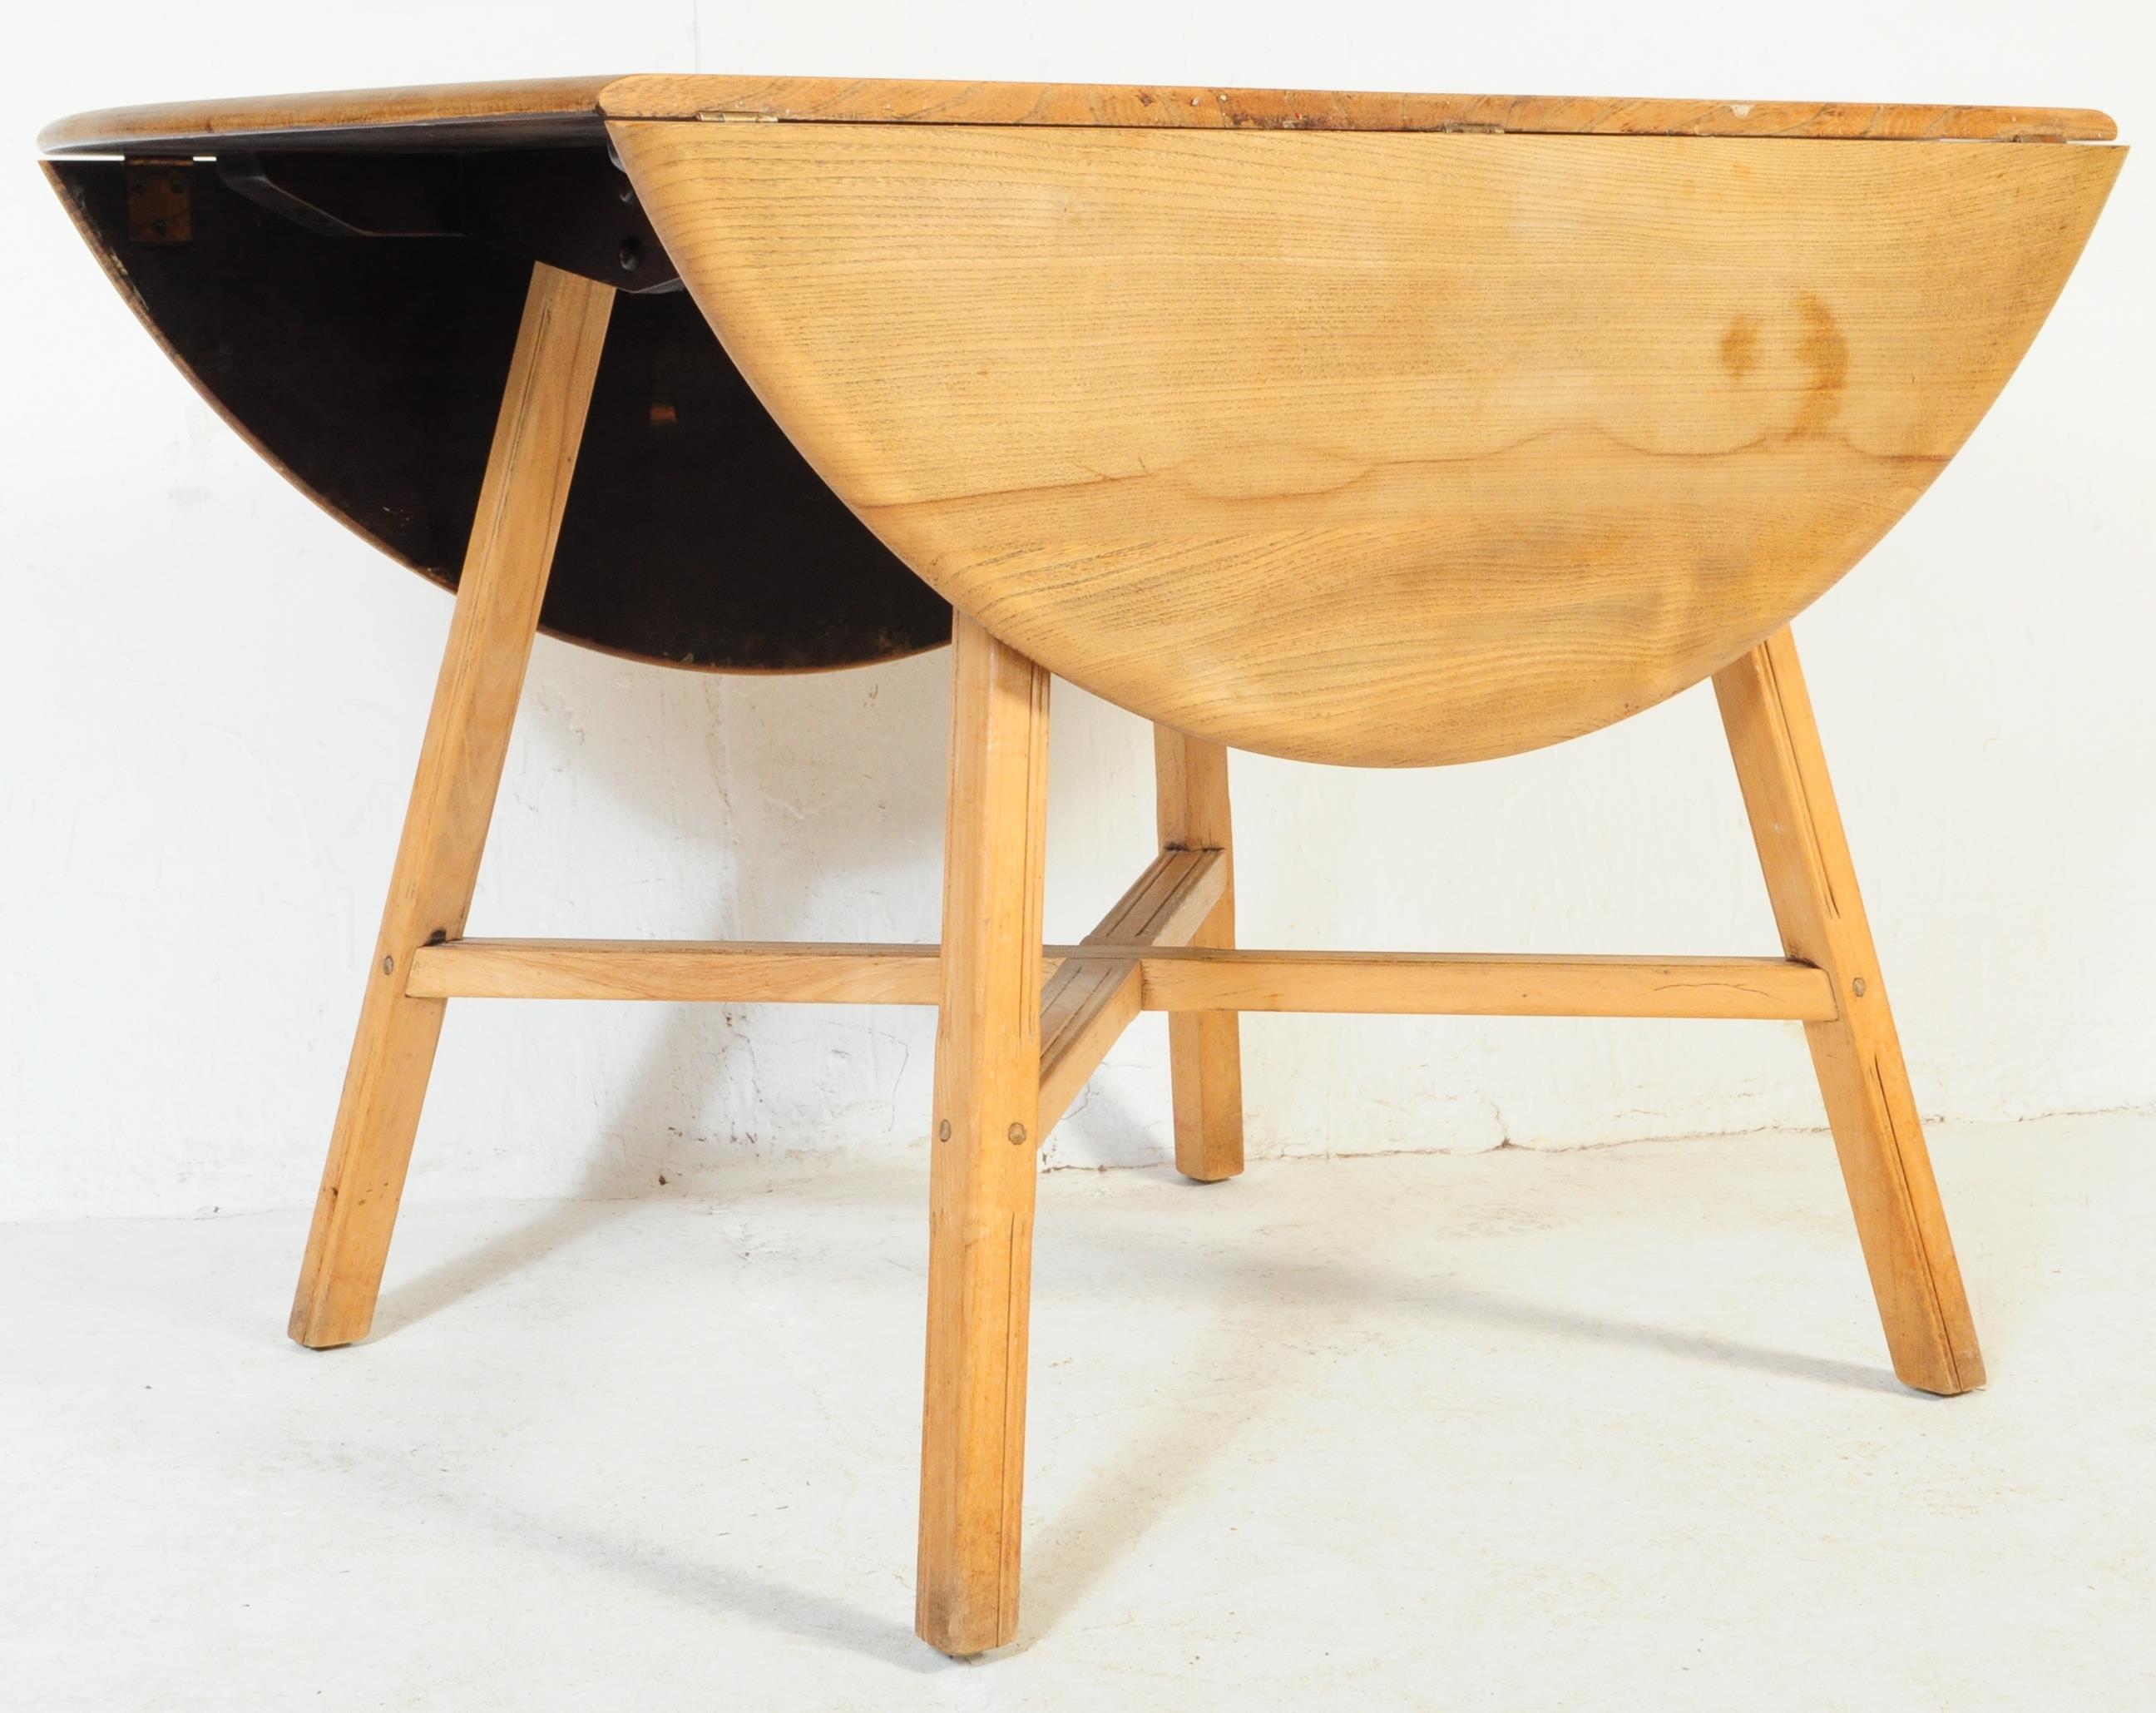 LATE 20TH CENTURY ERCOL DROP LEAF DINING TABLE & CHAIRS - Image 5 of 6